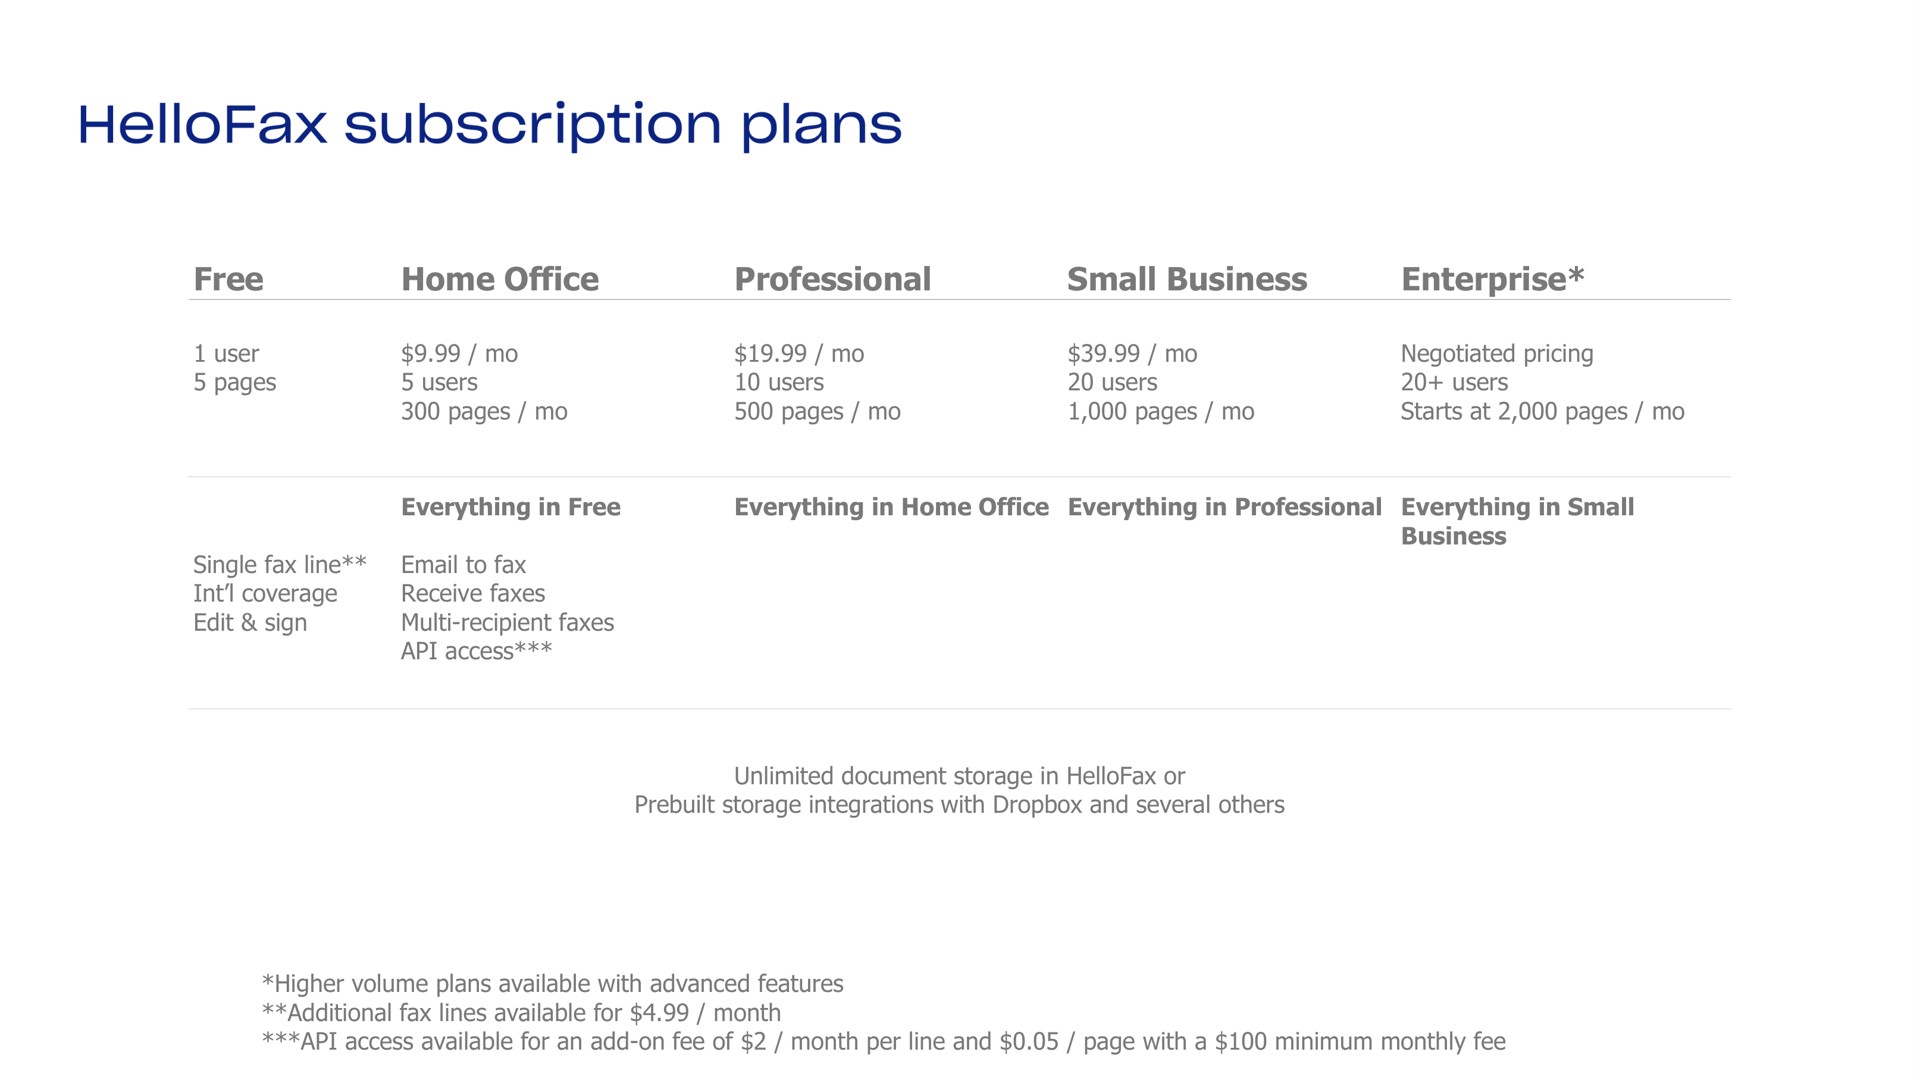 free home office professional small business enterprise | Dropbox